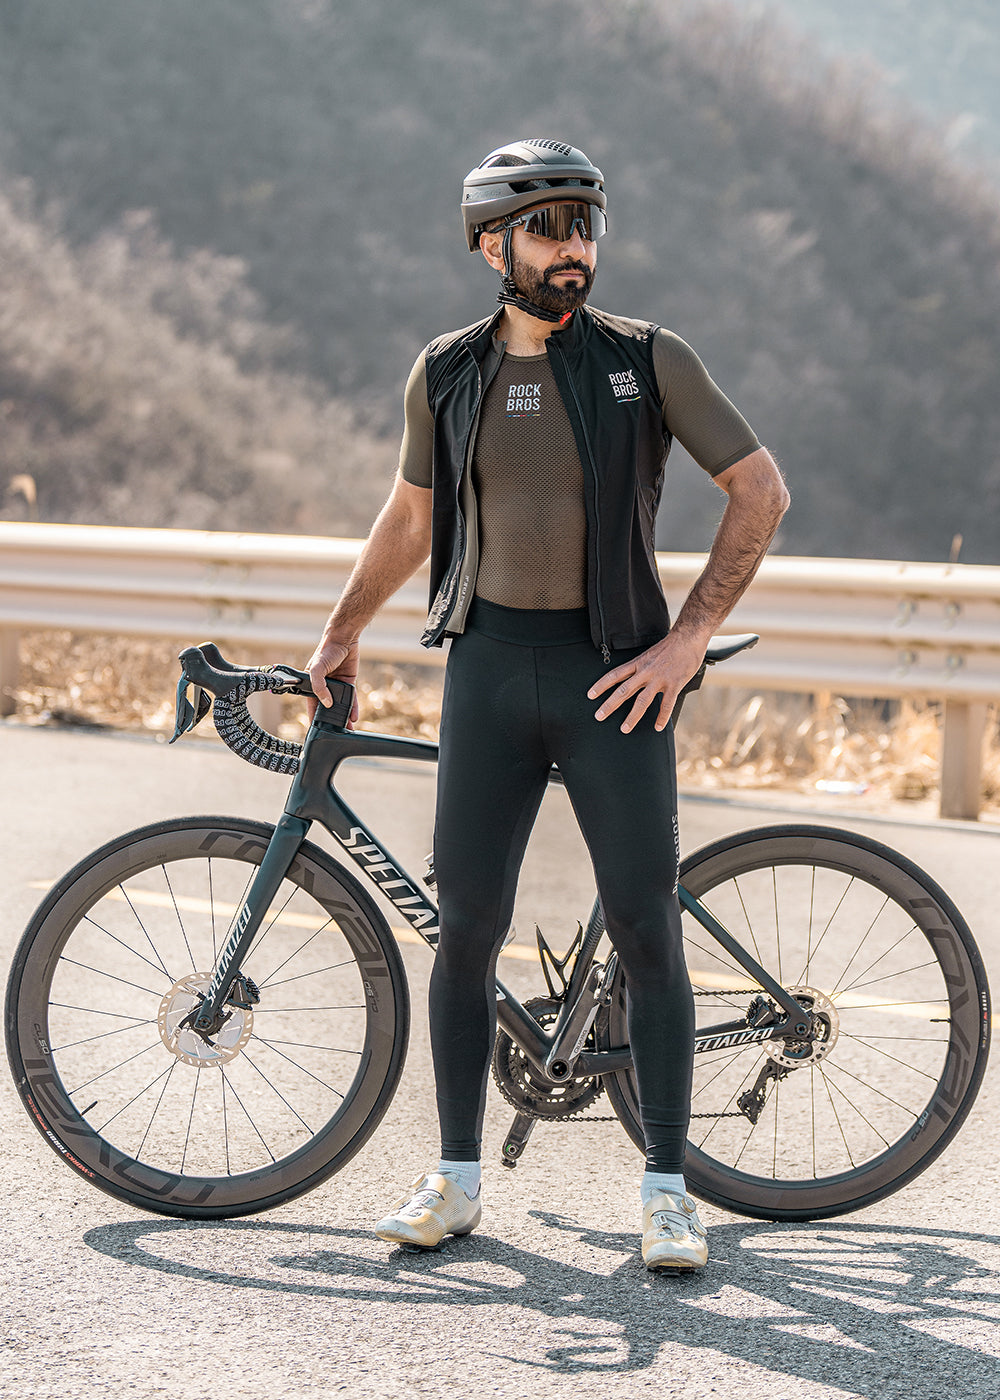 【ROAD TO SKY】by ROCKBROS Men's Cycling Tights in Black